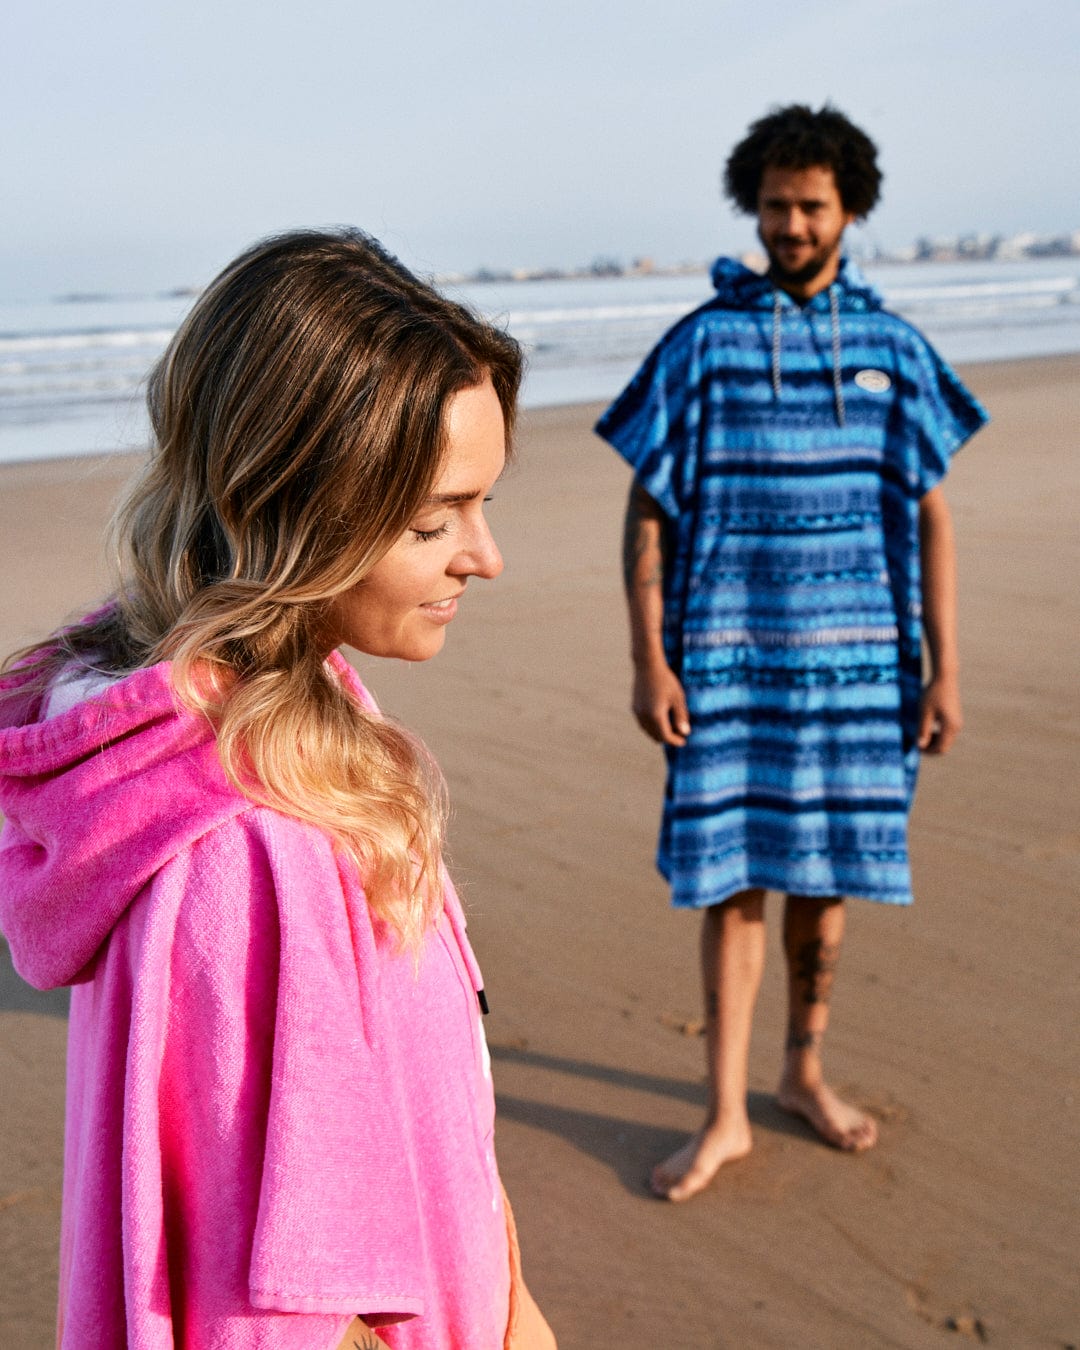 A woman in a pink Tropic Dip changing towel from Saltrock and a man in a blue poncho stand on a beach, with the woman looking to the side and the man towards her in the background.